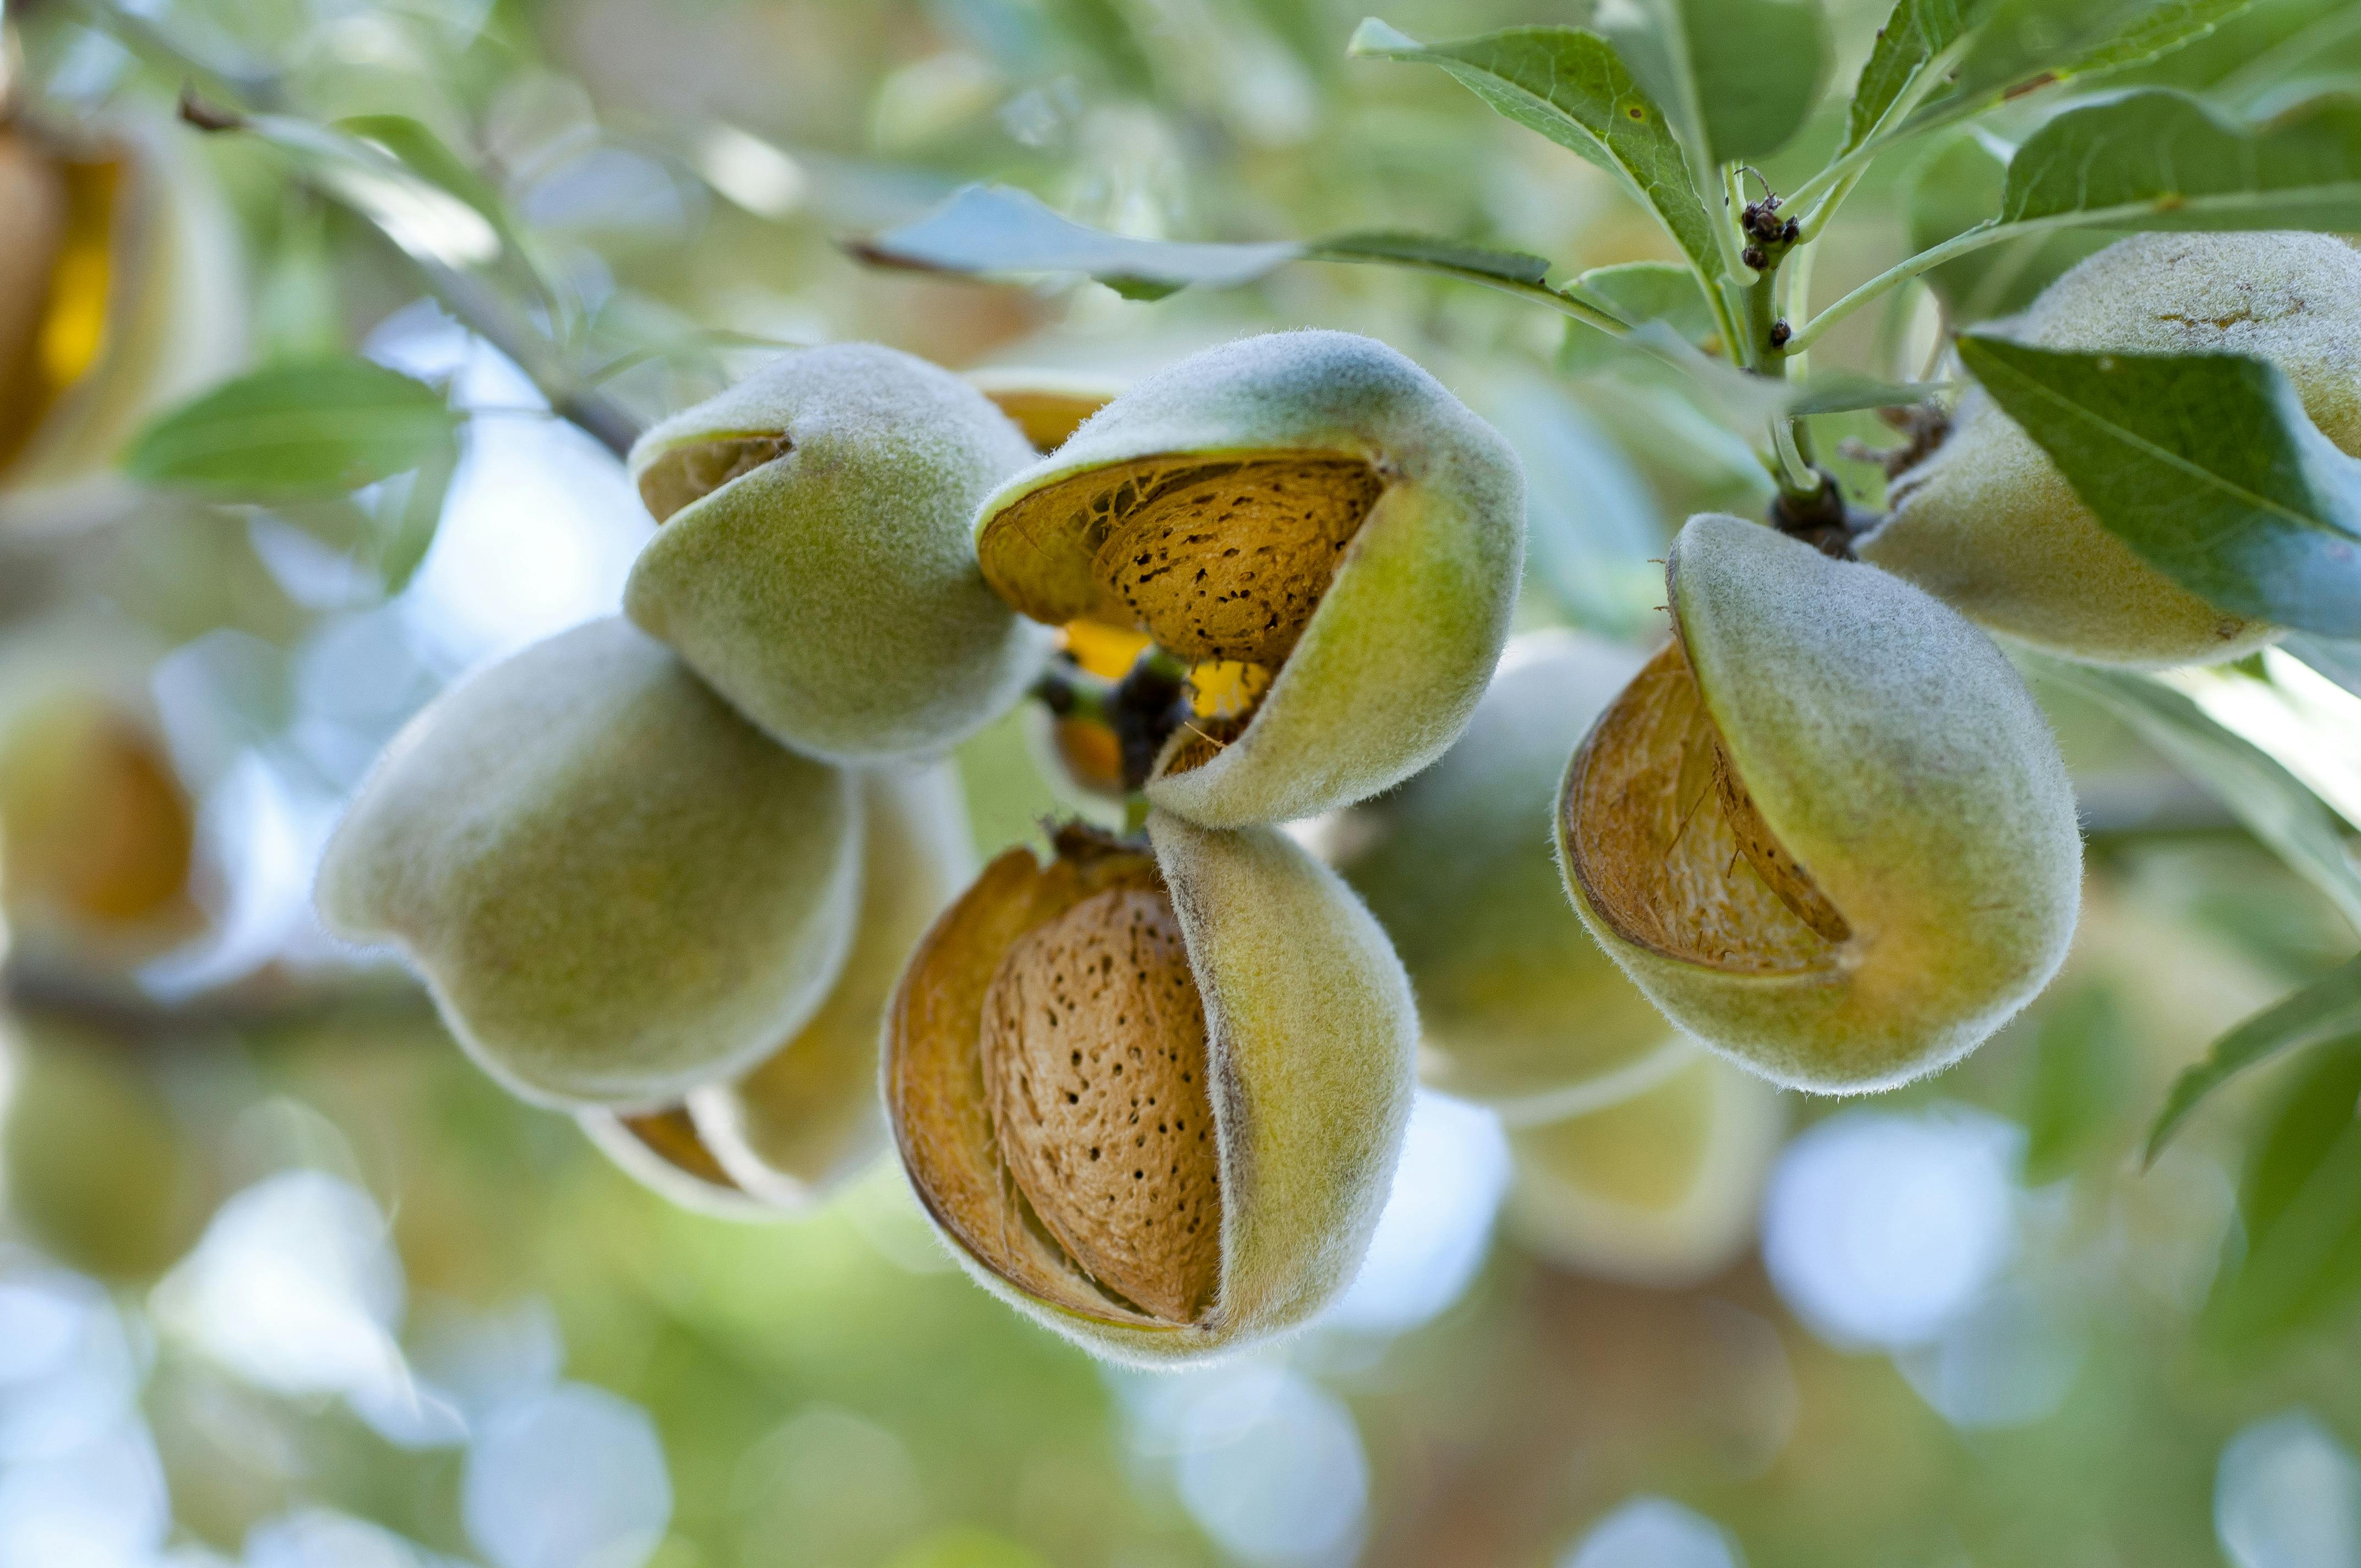 Image of almonds on a tree